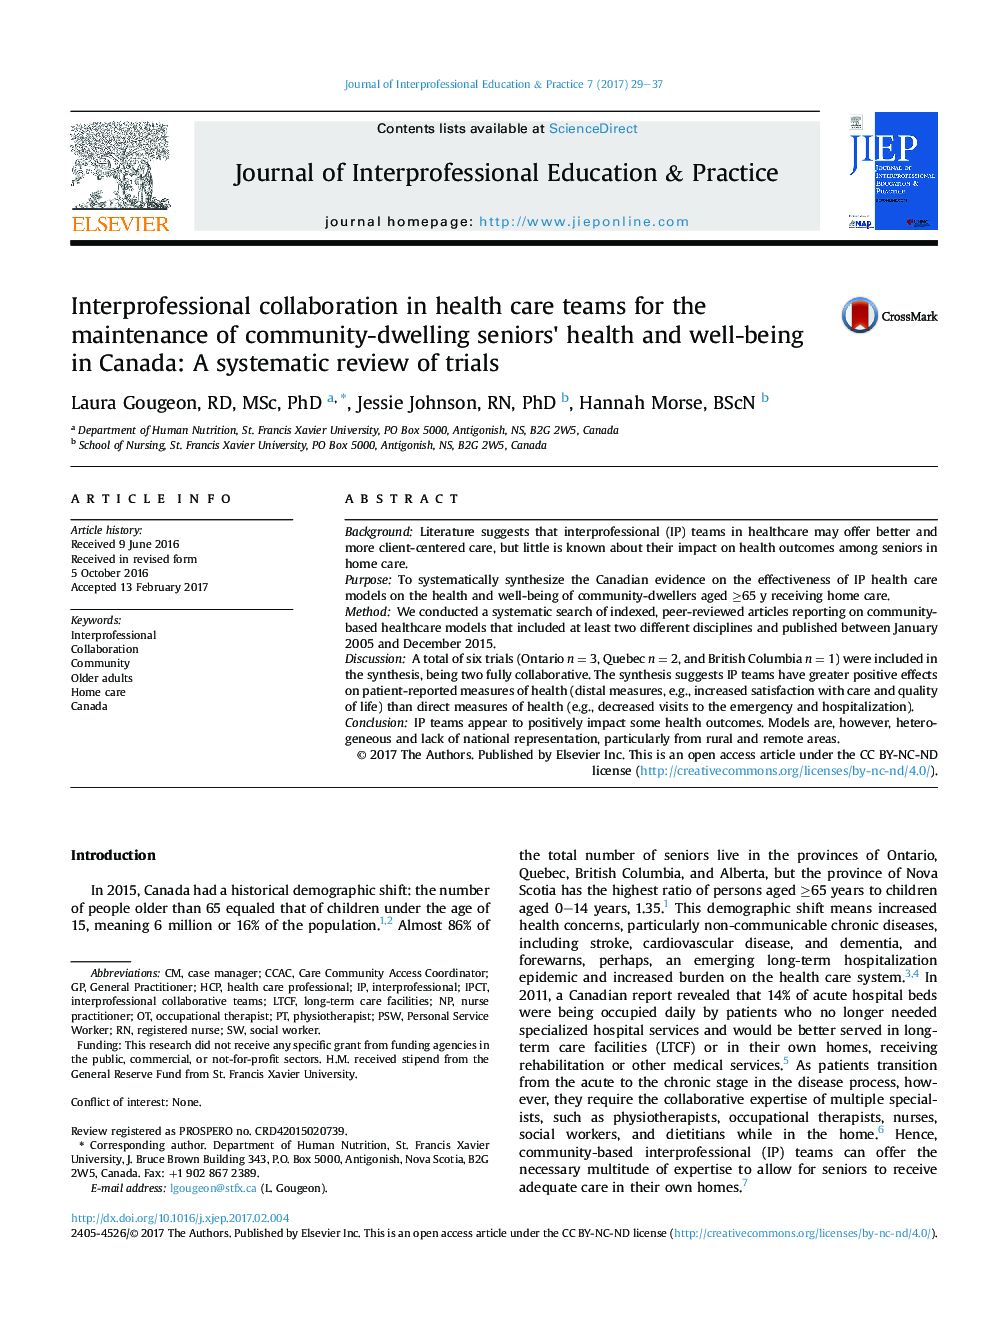 Interprofessional collaboration in health care teams for the maintenance of community-dwelling seniors' health and well-being in Canada: A systematic review of trials